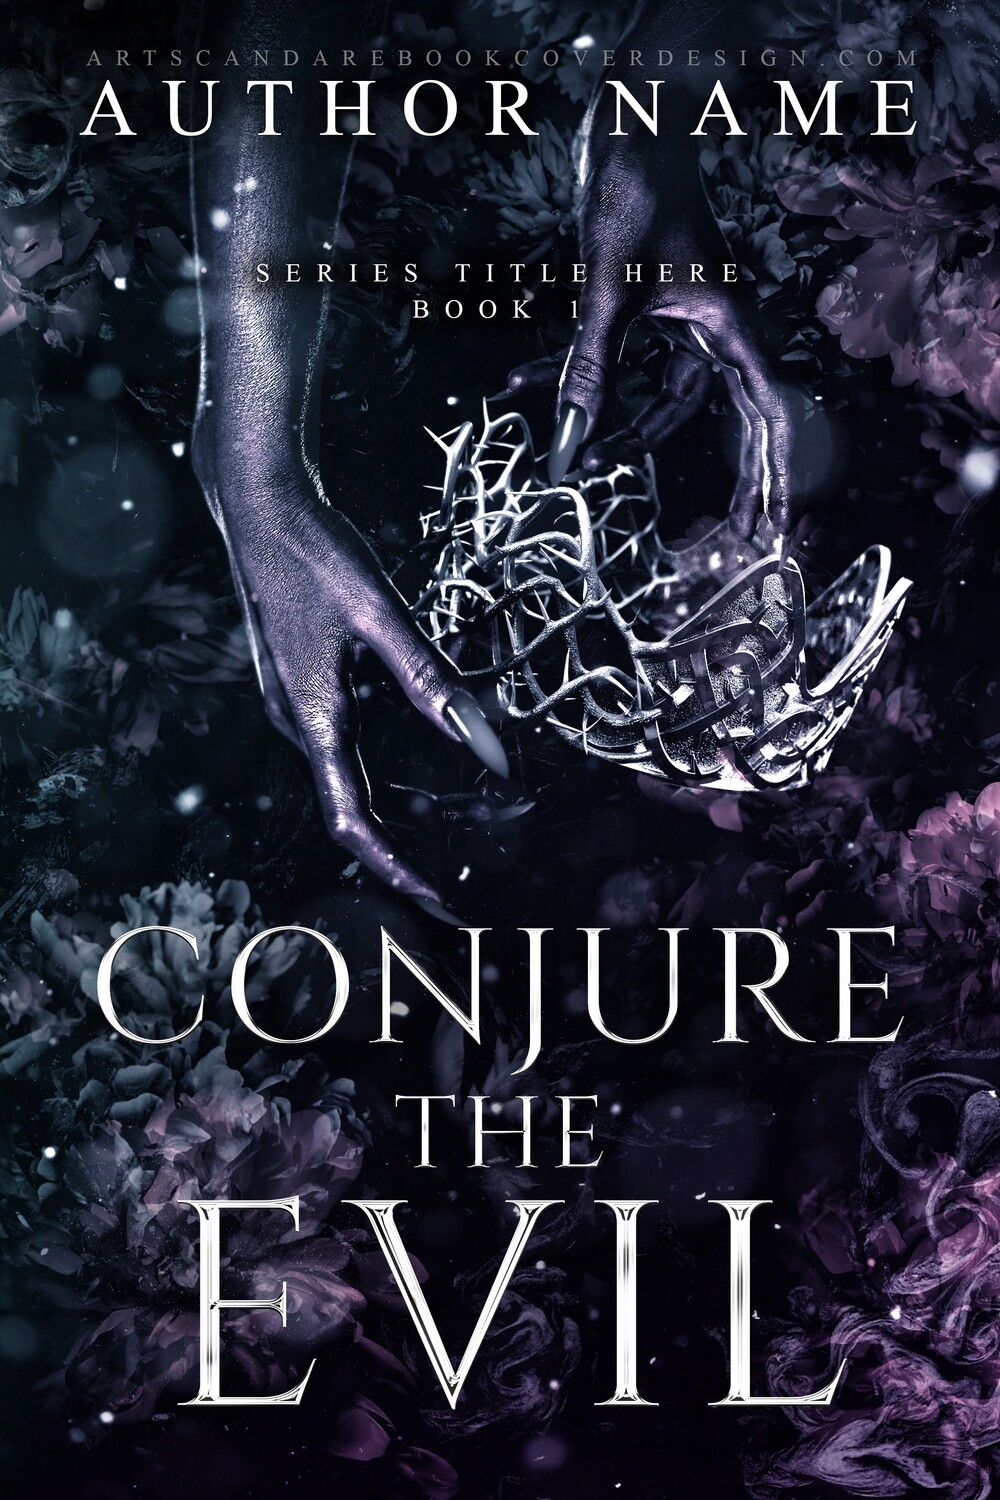 CONJURE THE EVIL